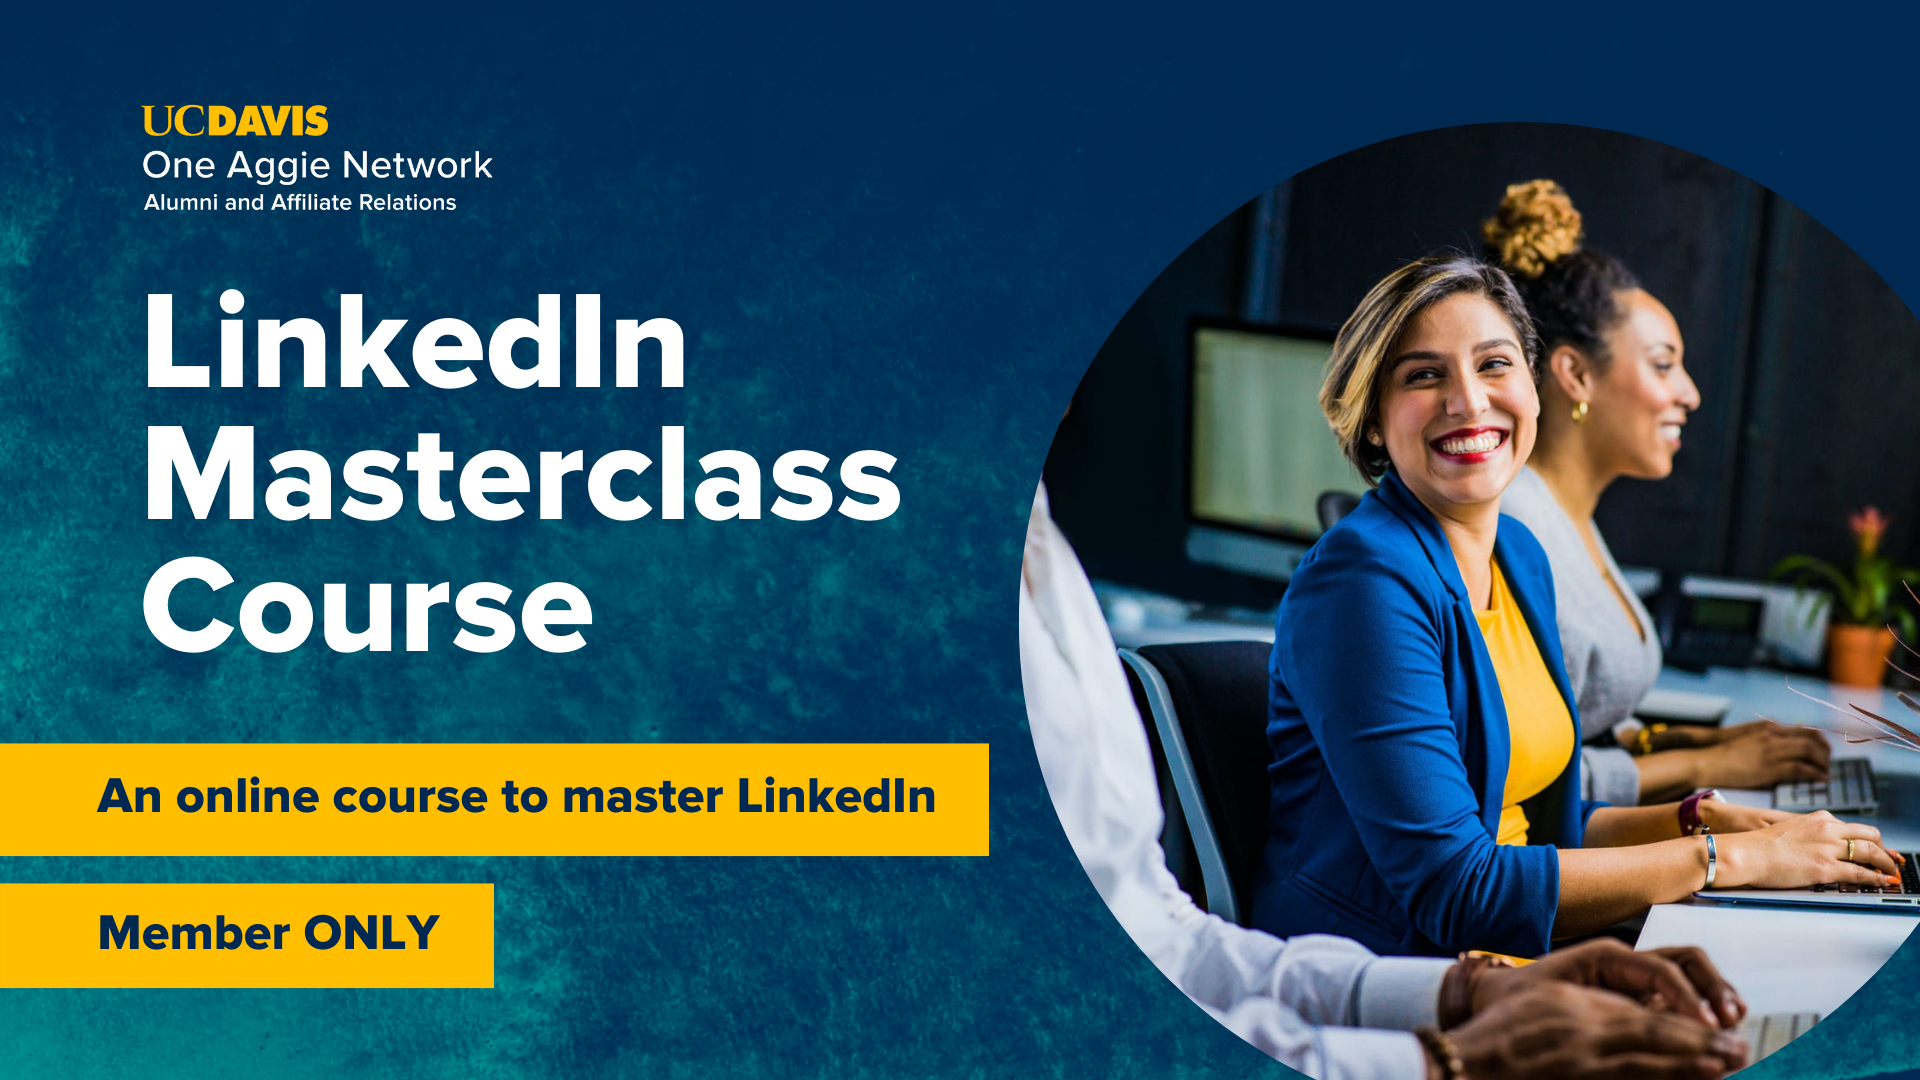 Image of woman smiling with text LinkedIn Masterclass course